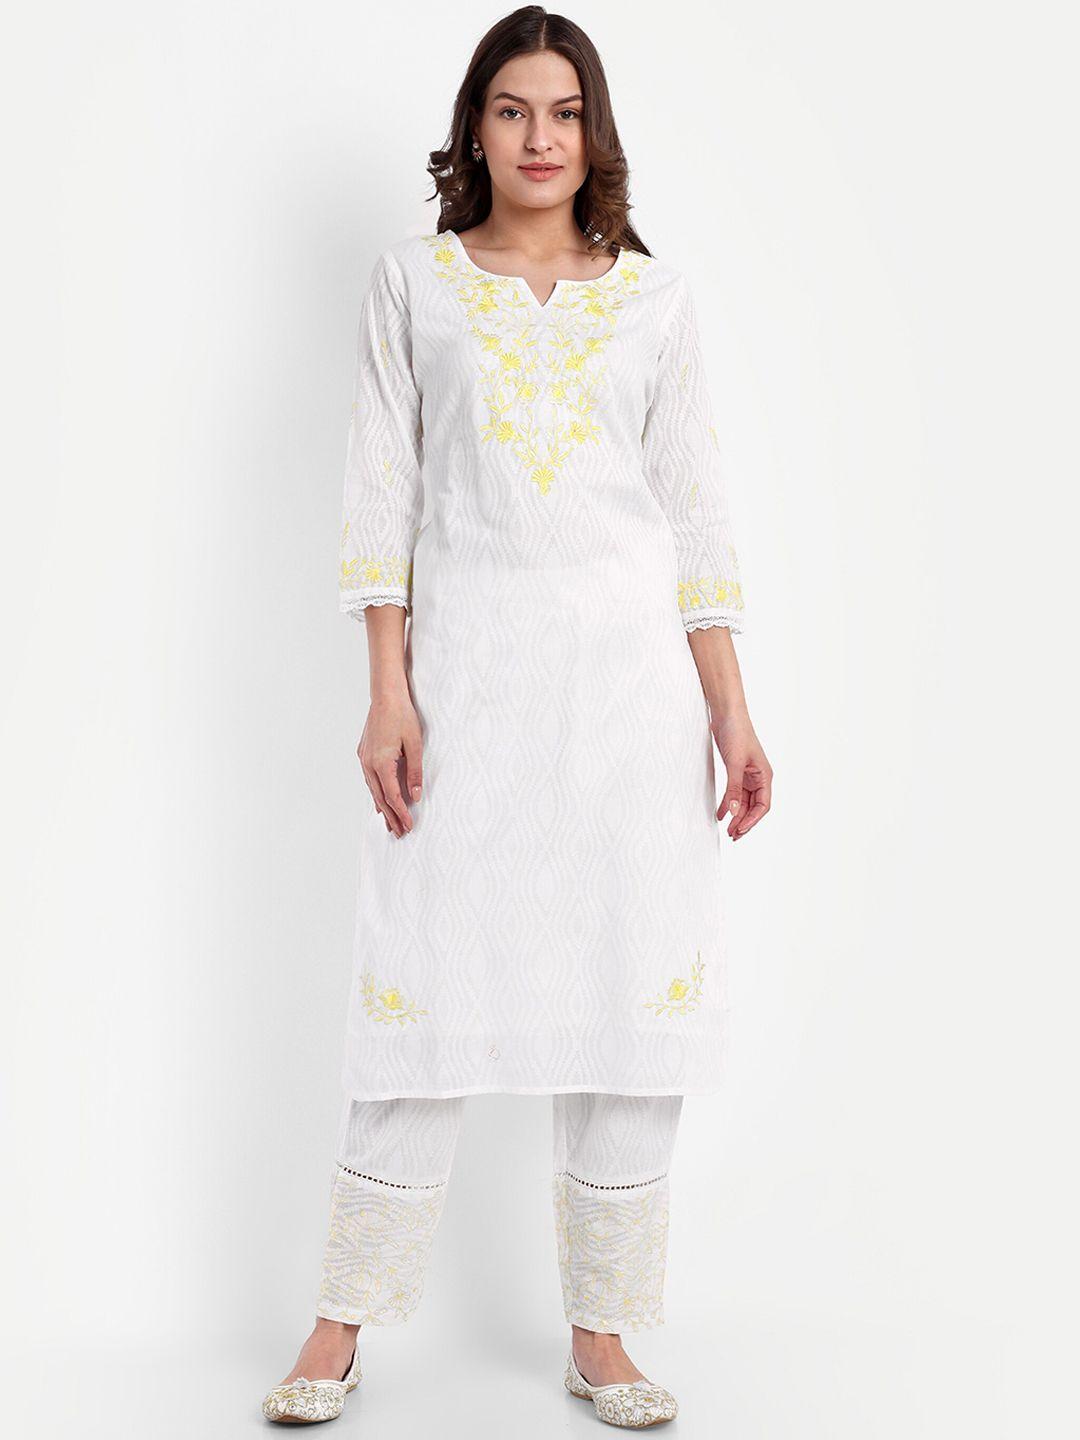 nh kapdewala floral embroidered regular pure cotton kurta with trousers